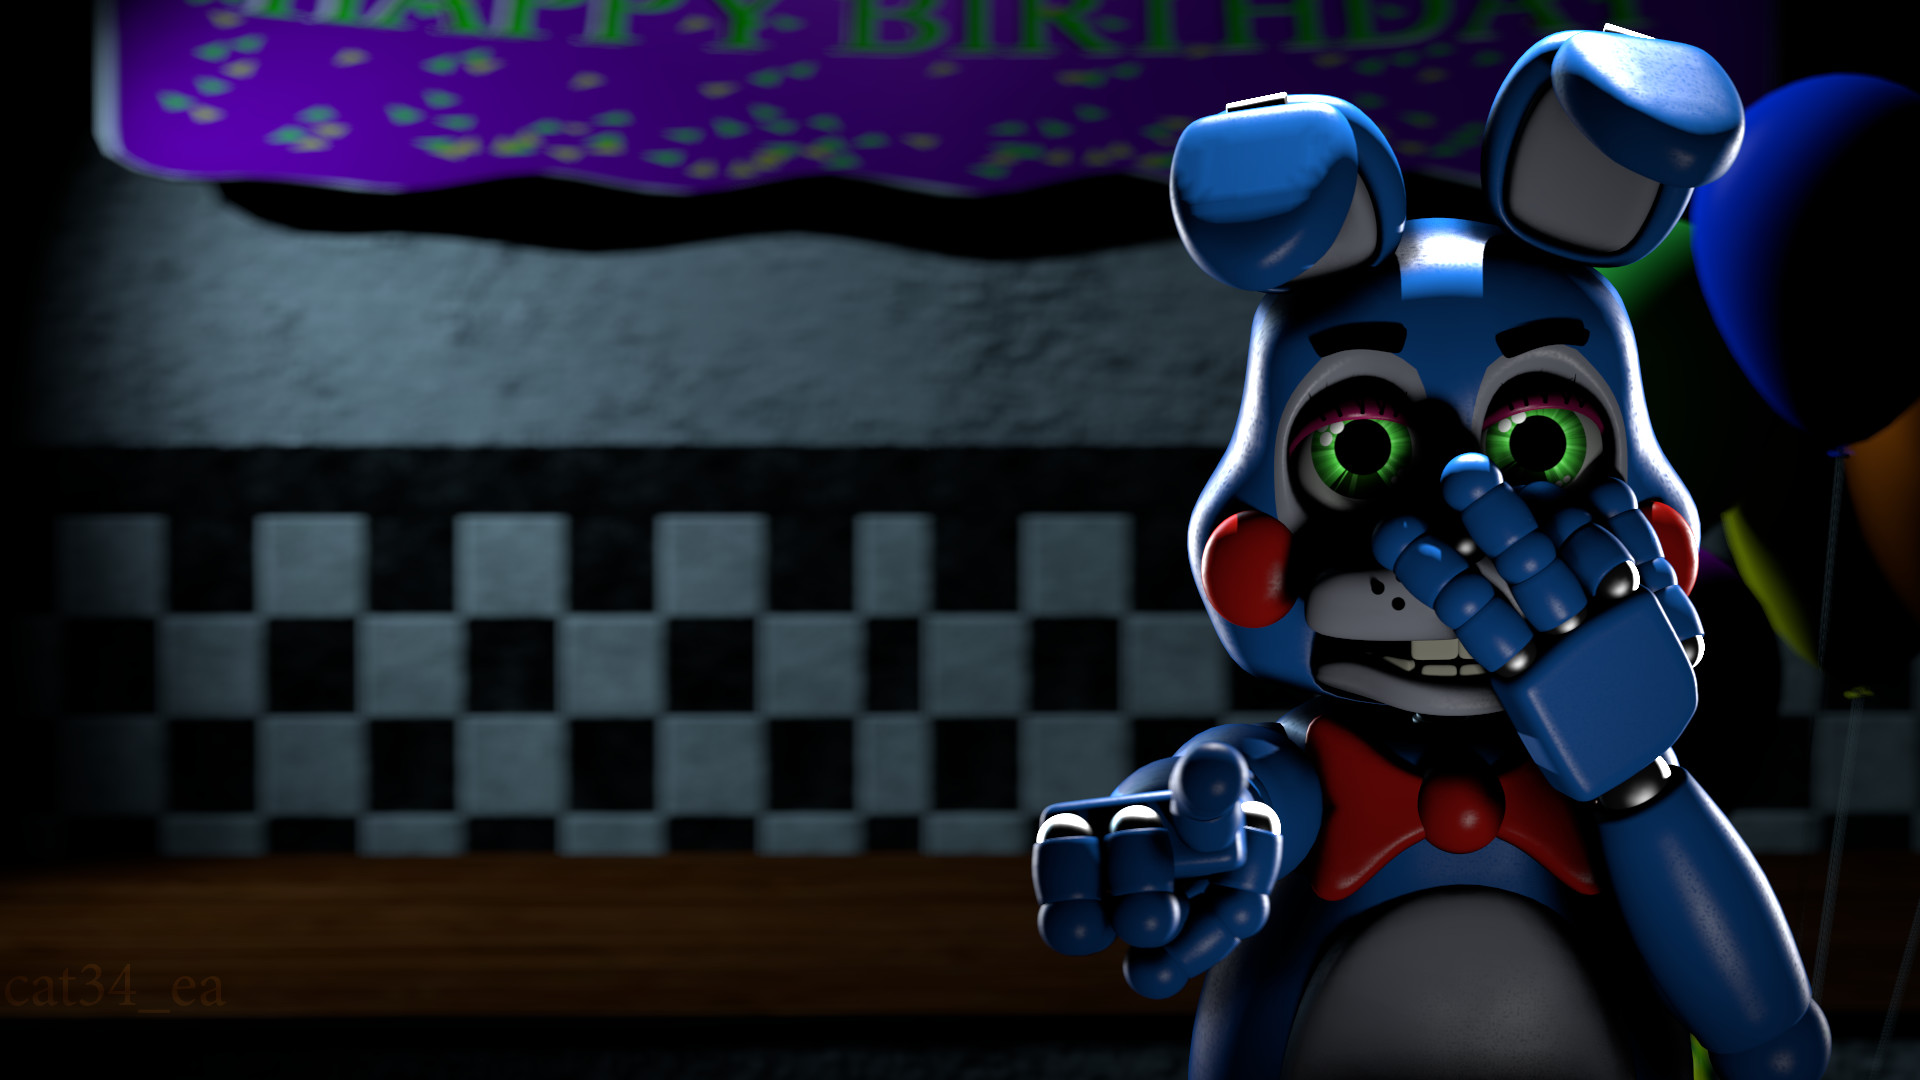 1920x1080 ... Toys Wallpapers N2 Toy Bonnie by cat34-ea